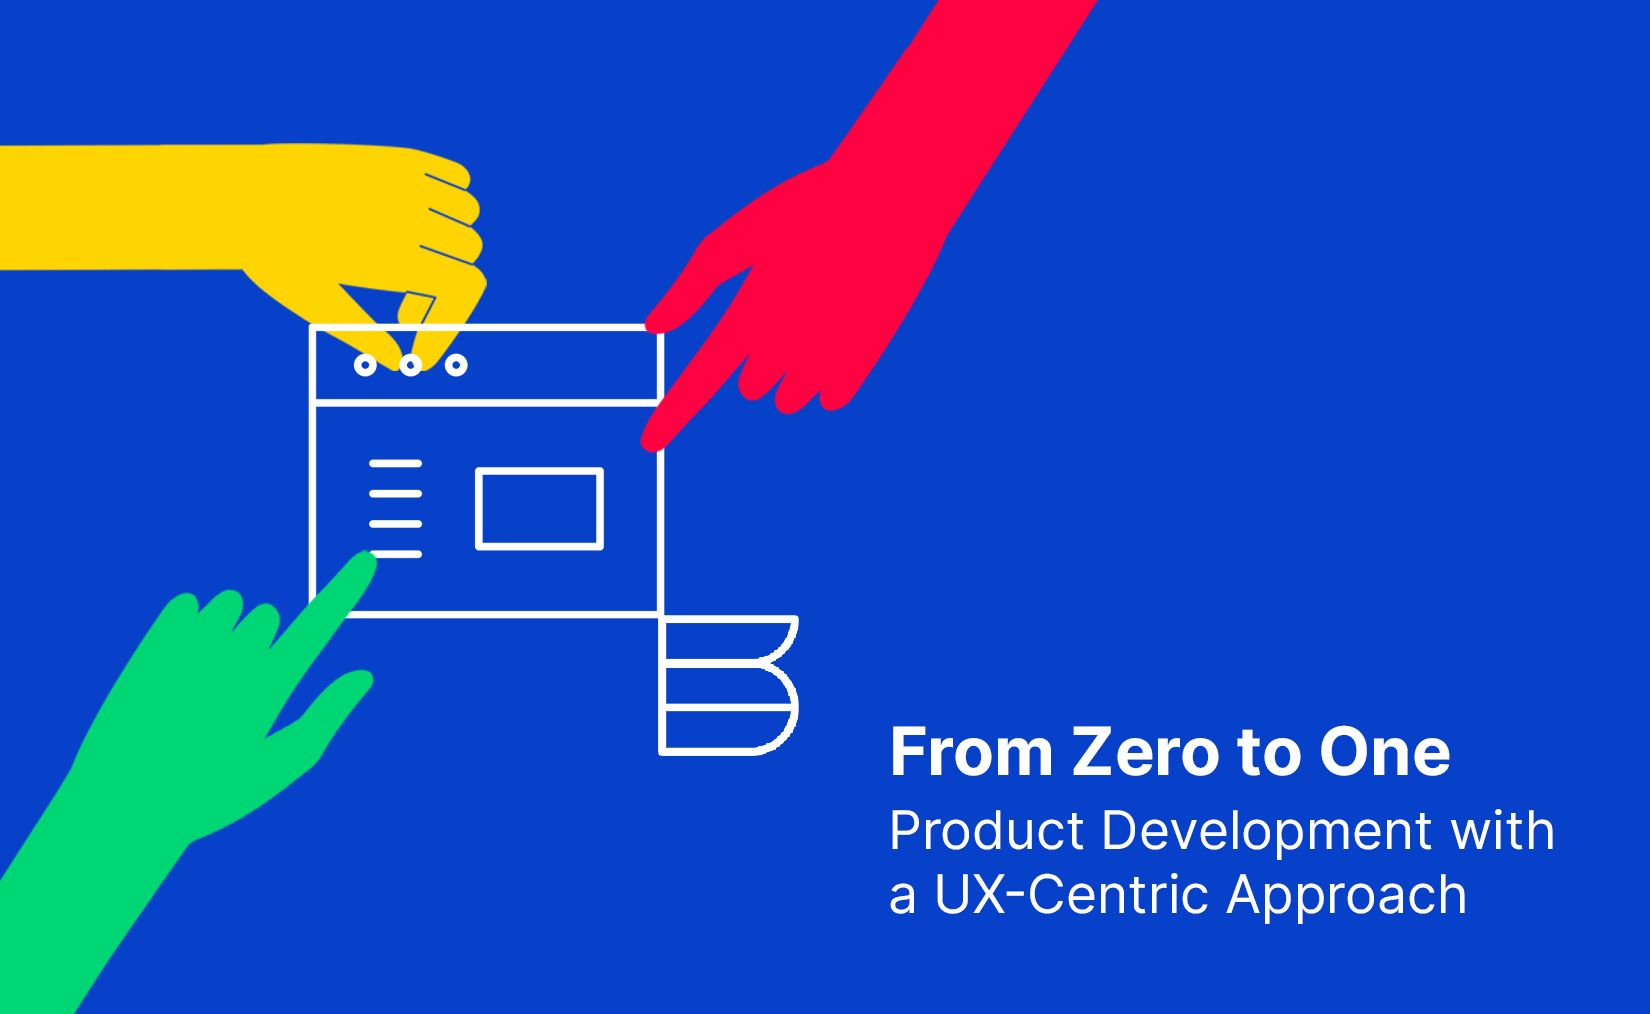 From Zero to One: Product Development with a UX-Centric Approach